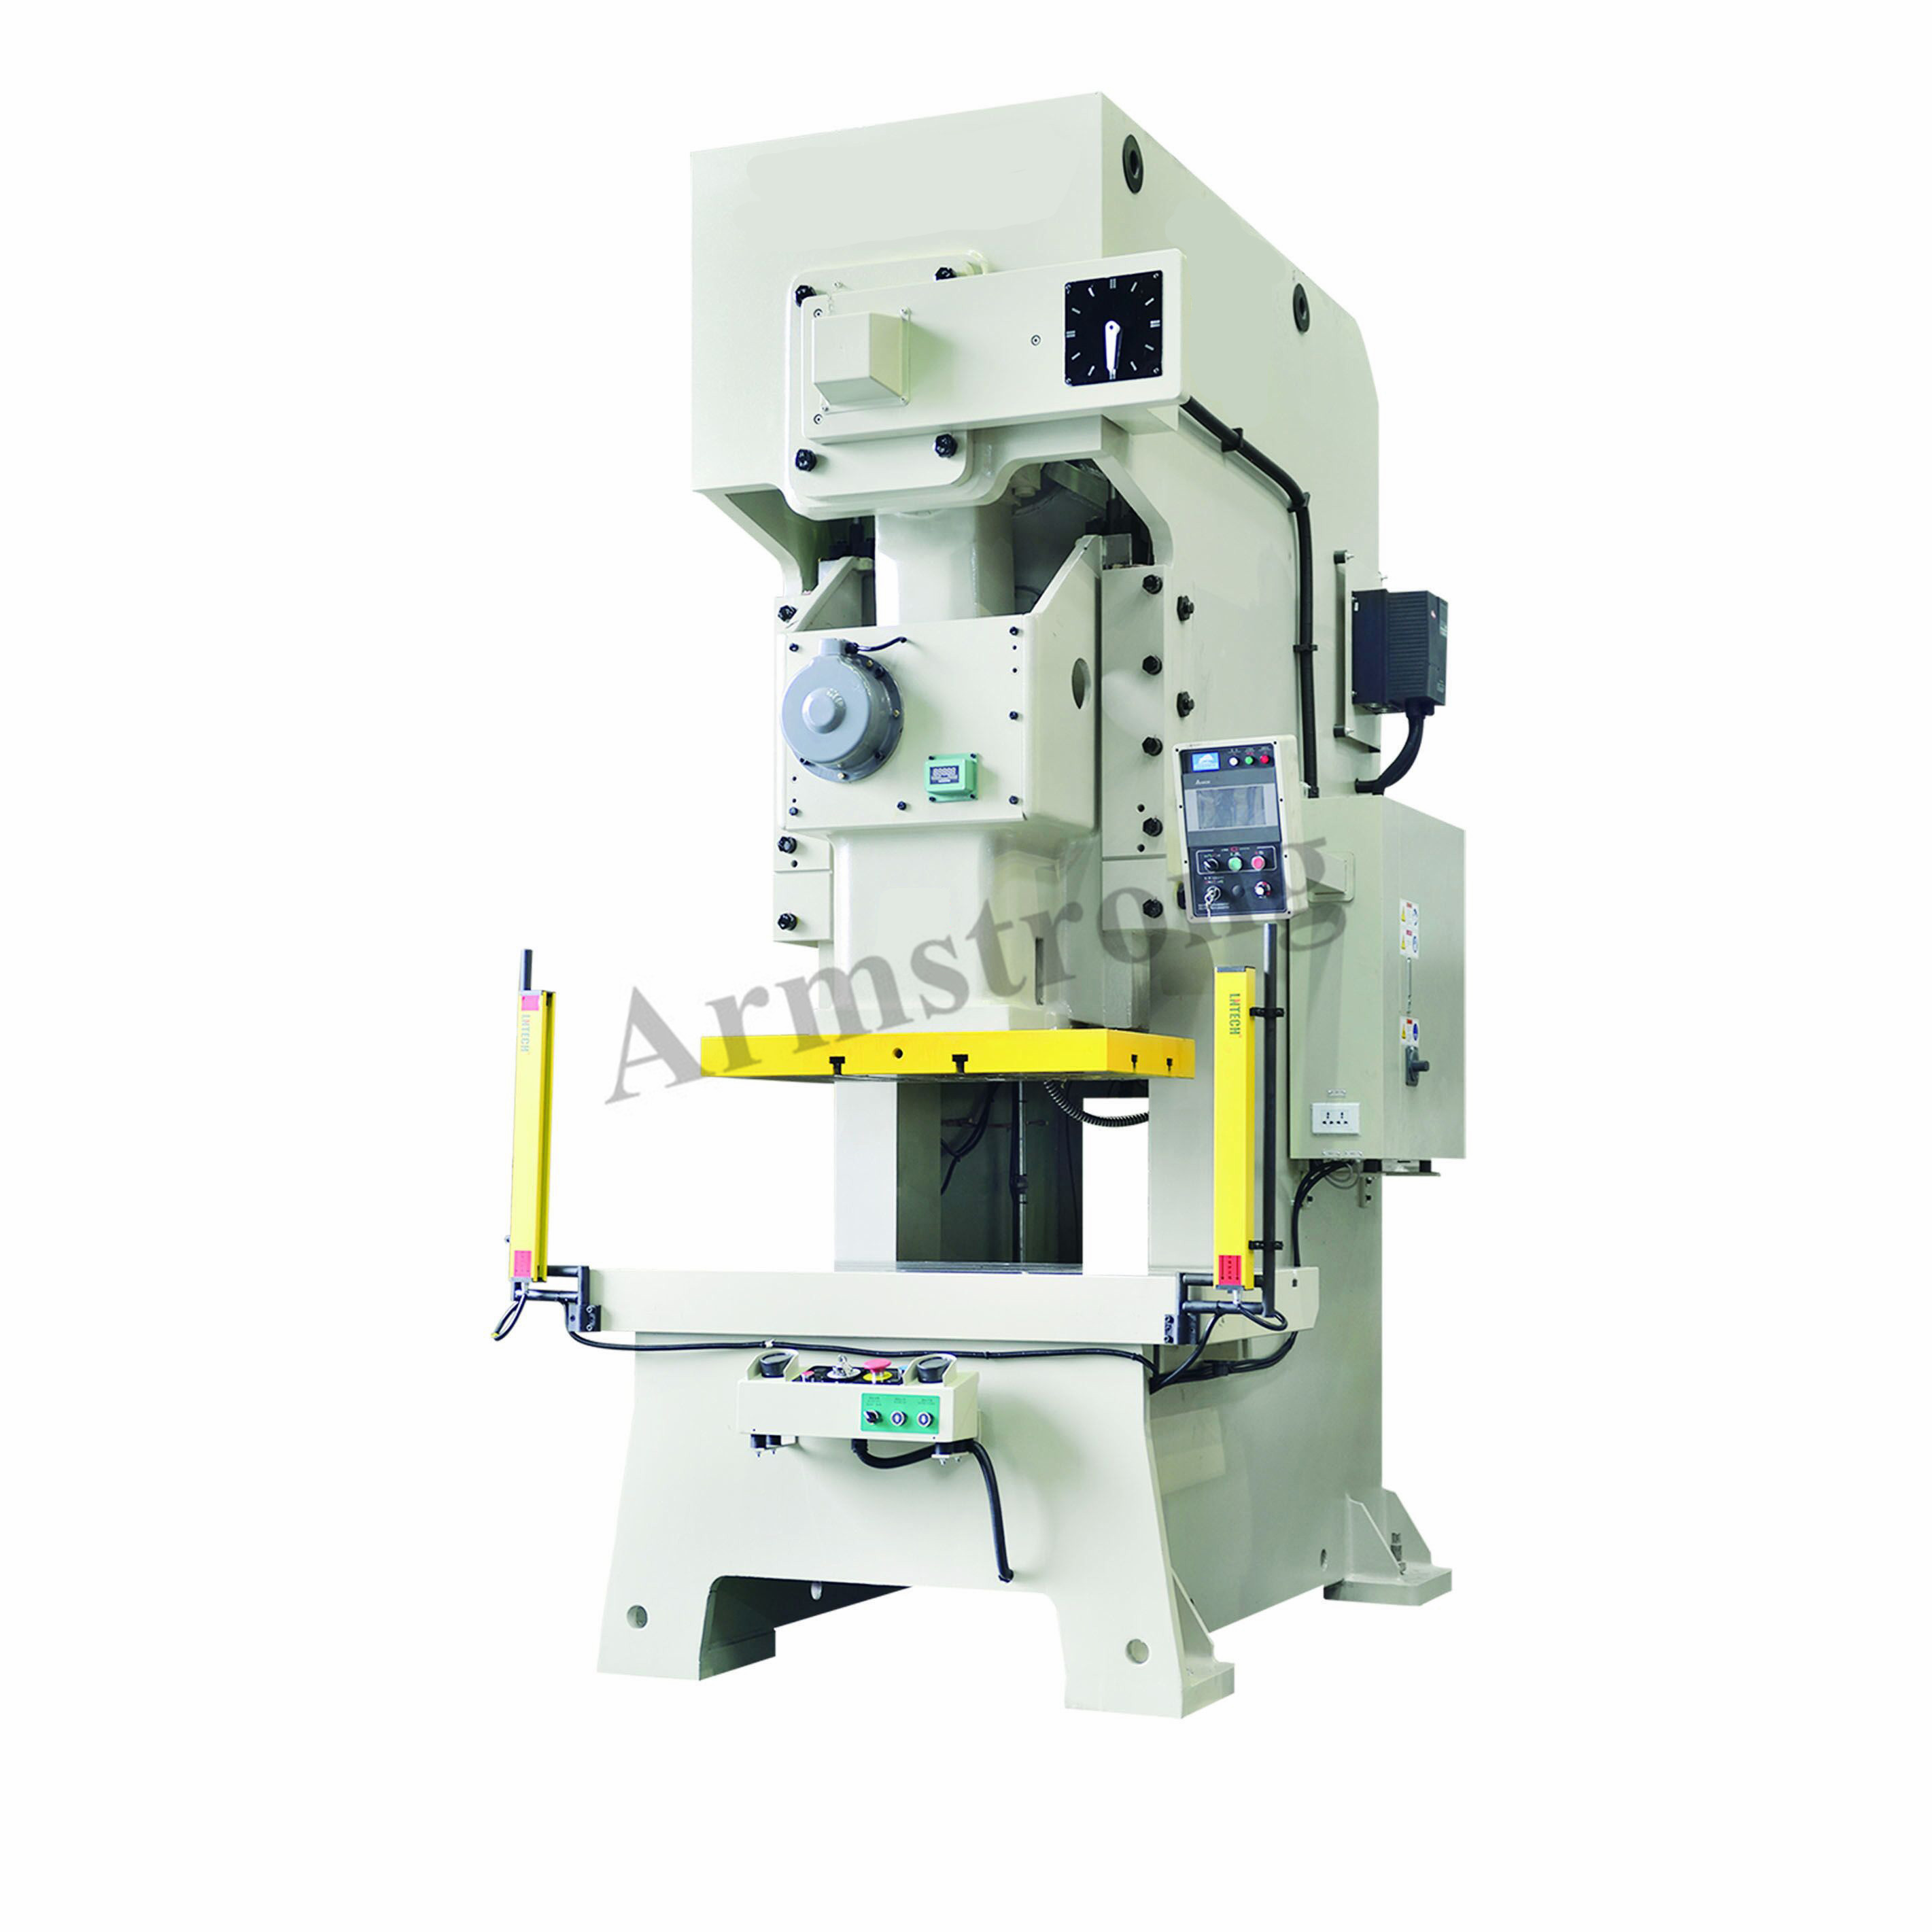 A-PM series Punching machine Featured Image